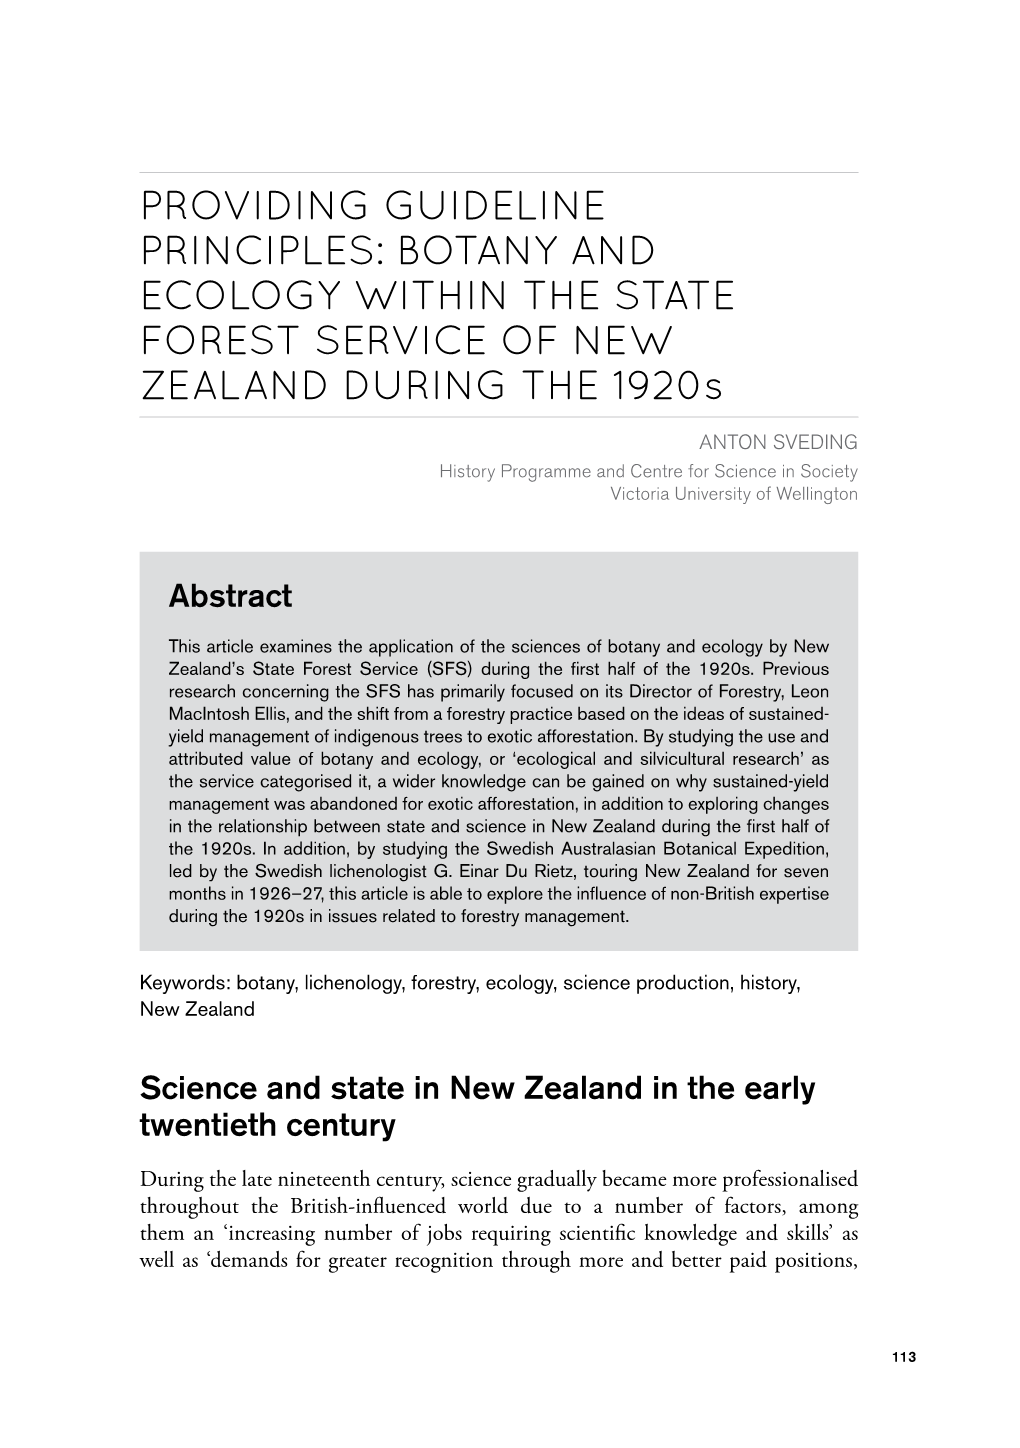 BOTANY and ECOLOGY WITHIN the STATE FOREST SERVICE of NEW ZEALAND DURING the 1920S